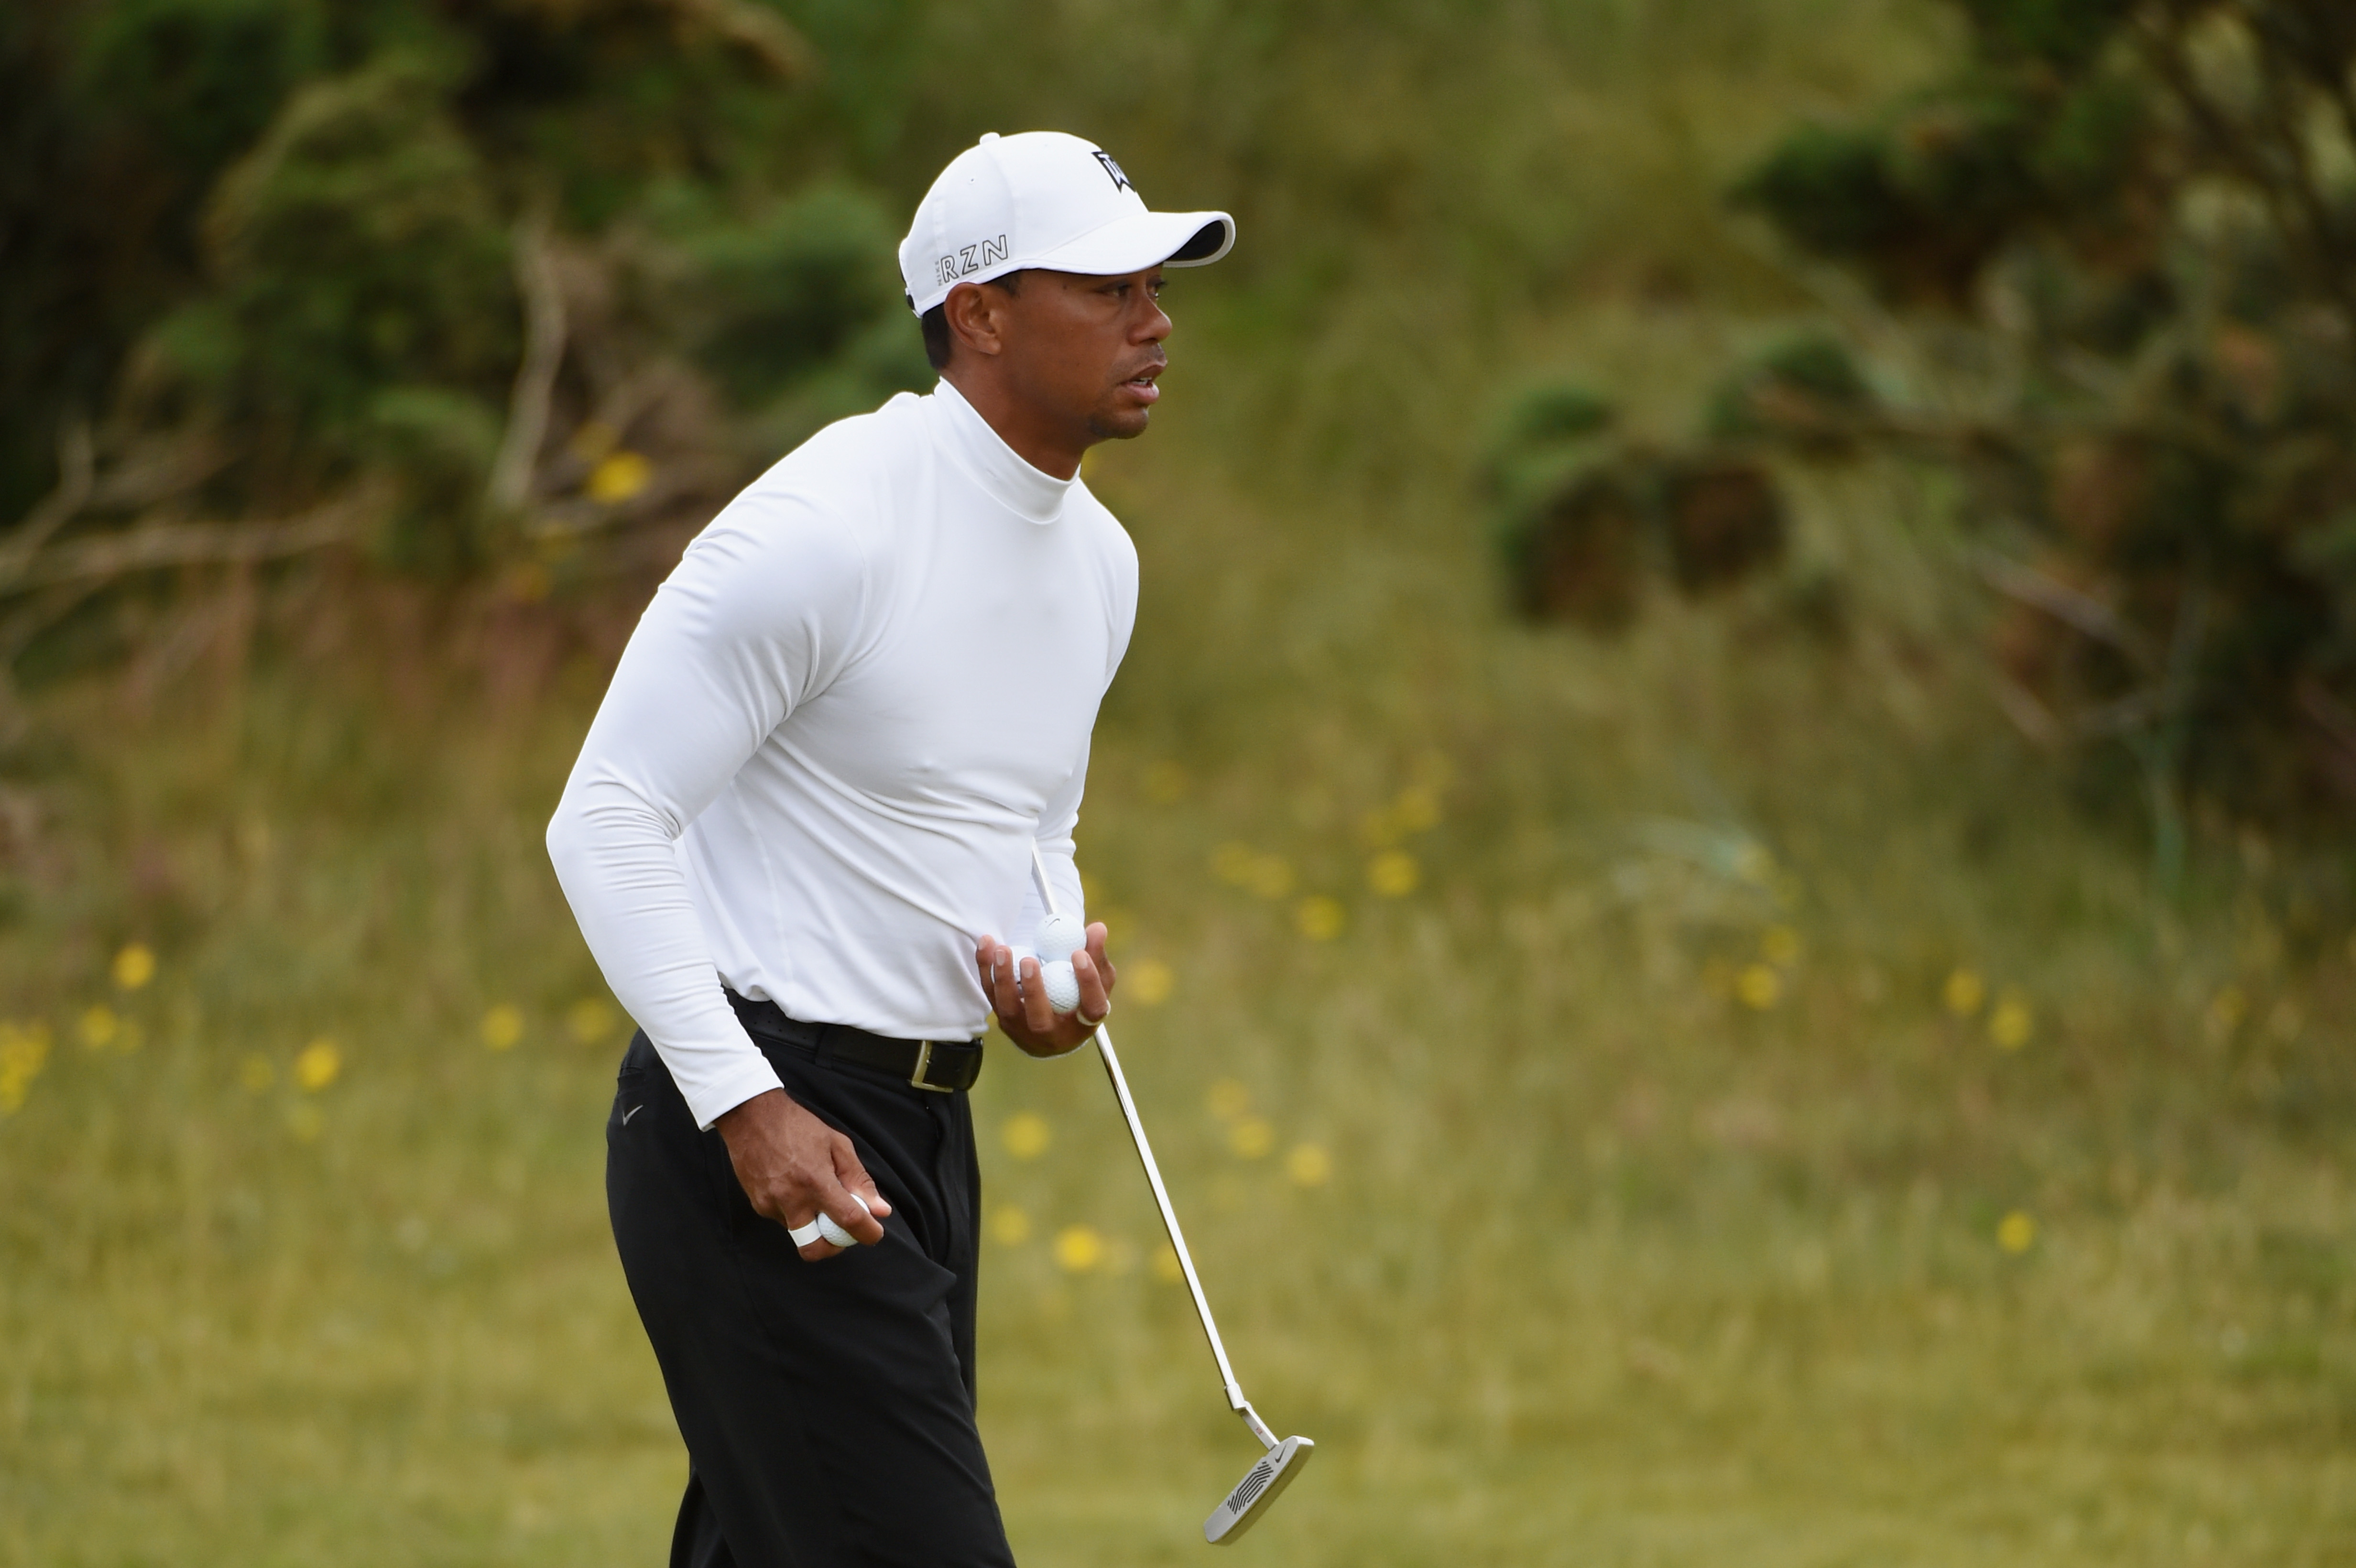 Tiger 'excited' to be back at St. Andrews - Newsfeed4928 x 3280